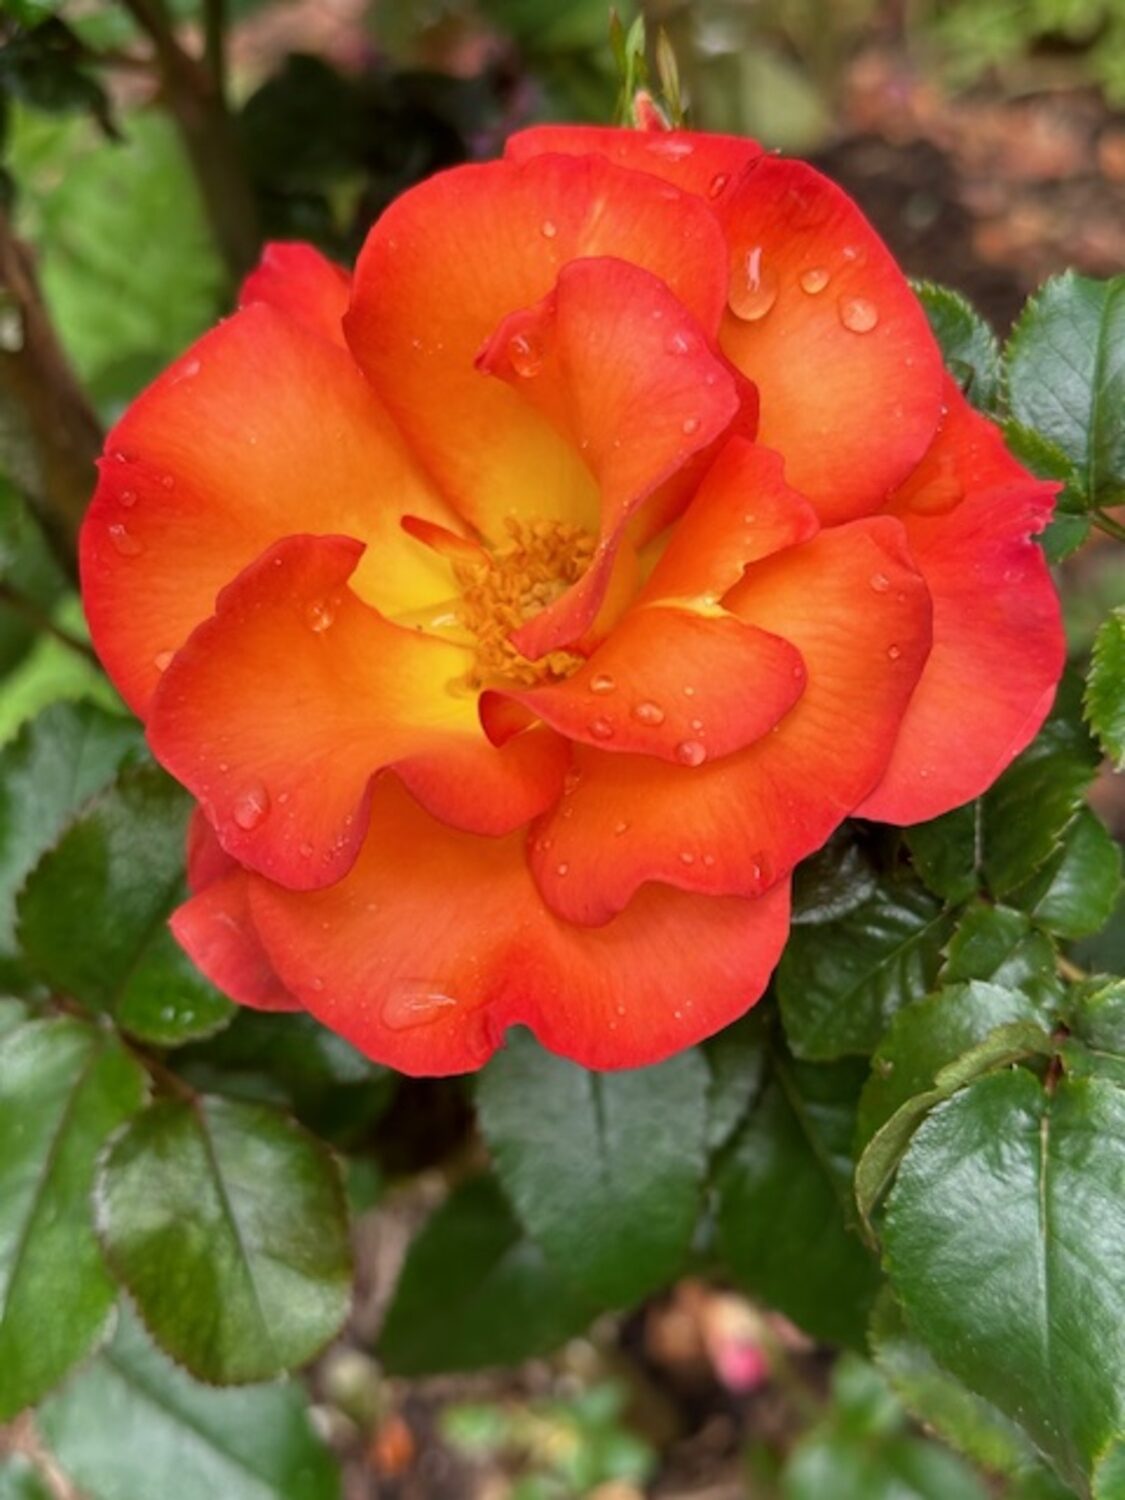 Wendy Serkin has a wide variety of roses in the garden at her Southampton home. WENDY SERKIN